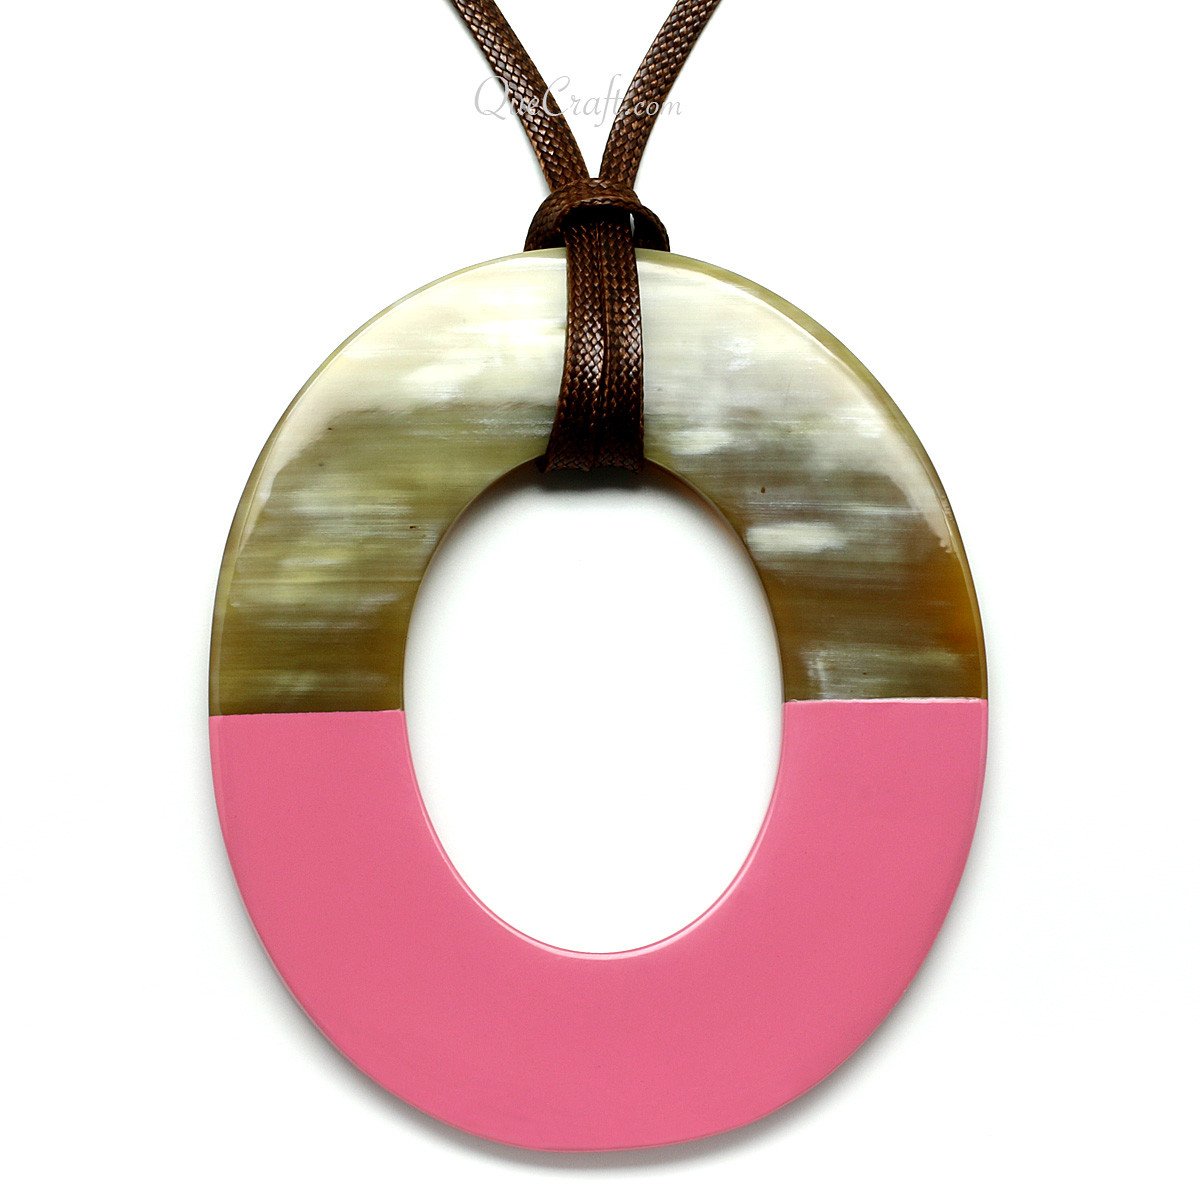 Horn & Lacquer Pendant #11558 - HORN JEWELRY